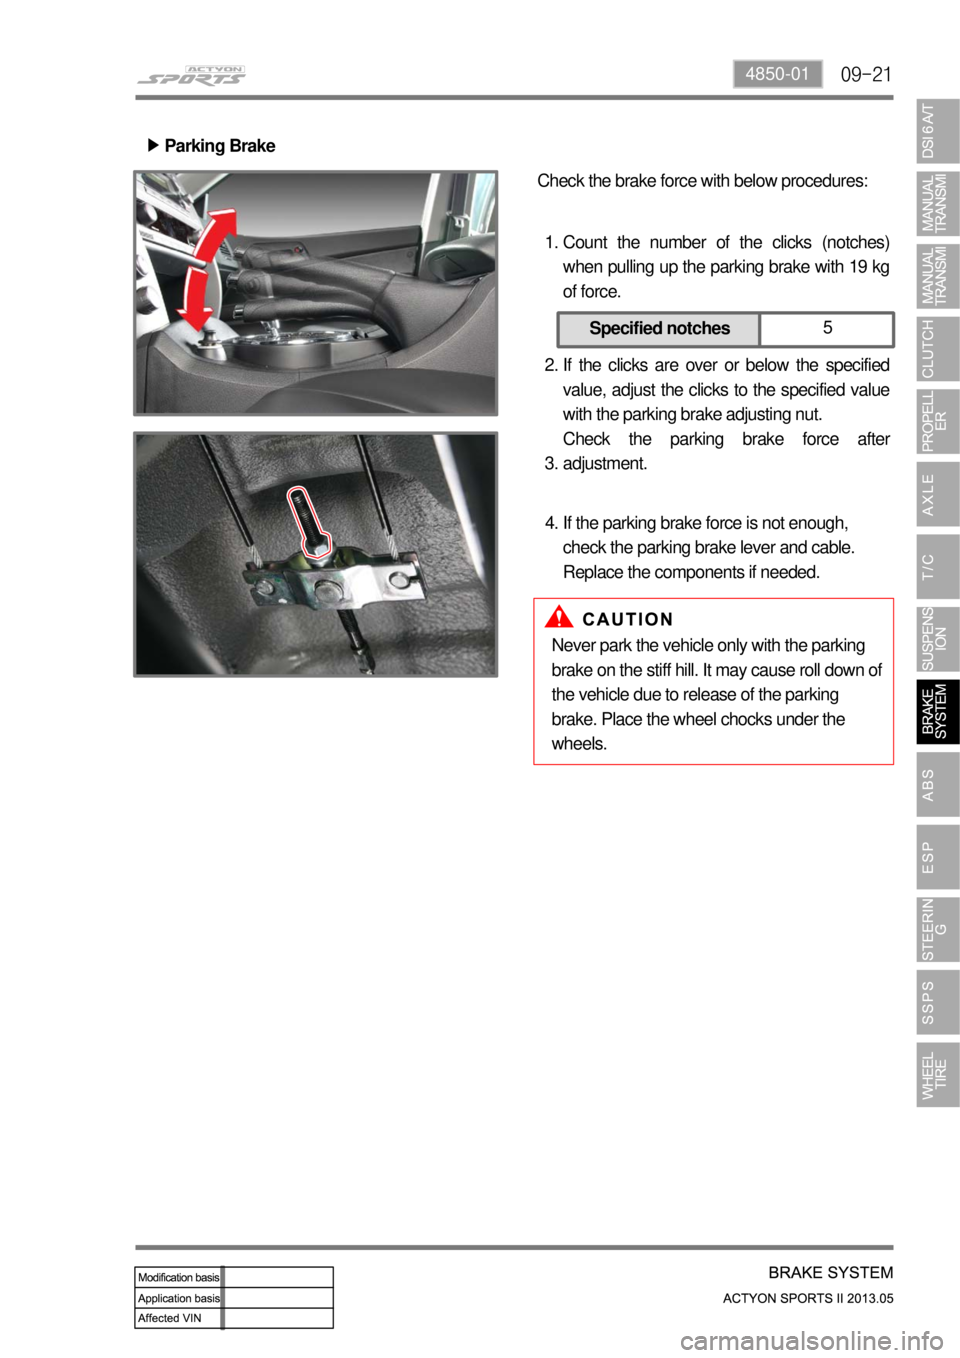 SSANGYONG NEW ACTYON SPORTS 2013 User Guide 09-214850-01
Check the brake force with below procedures:
Count the number of the clicks (notches) 
when pulling up the parking brake with 19 kg 
of force.
If the clicks are over or below the specifie